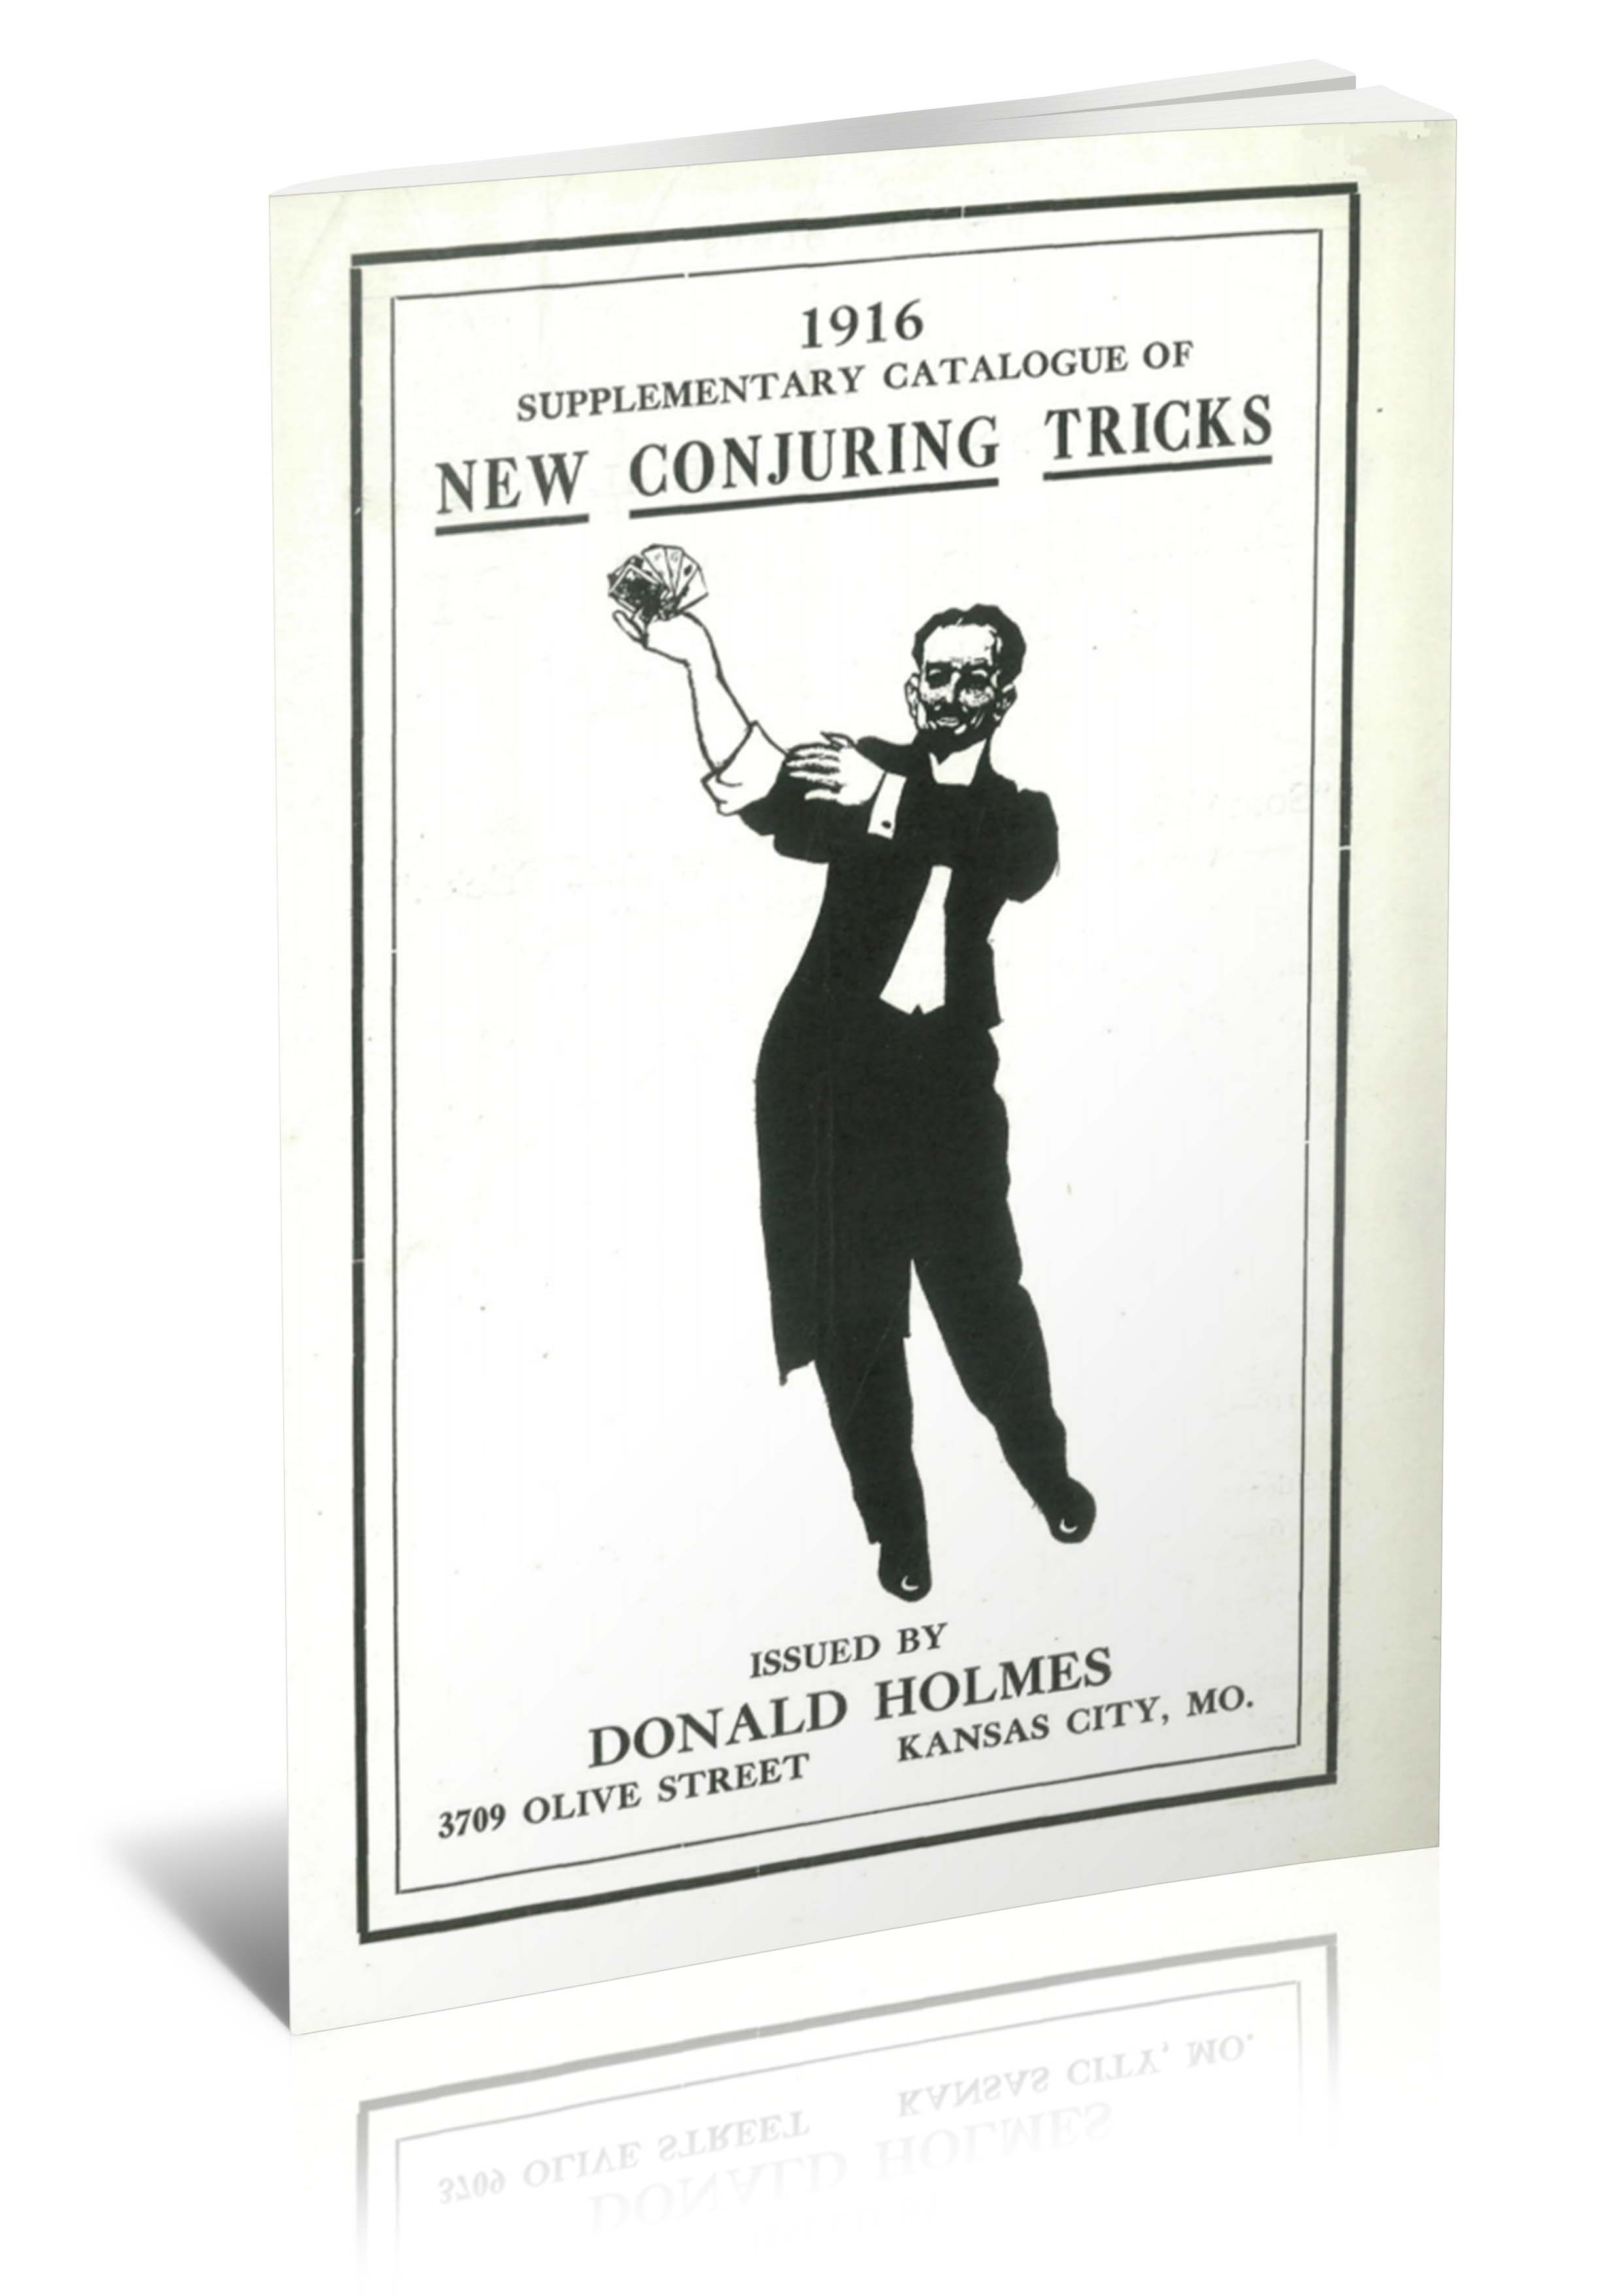 Donald Holmes - 1916 Supplementary Catalogue of New Conjuring Tricks